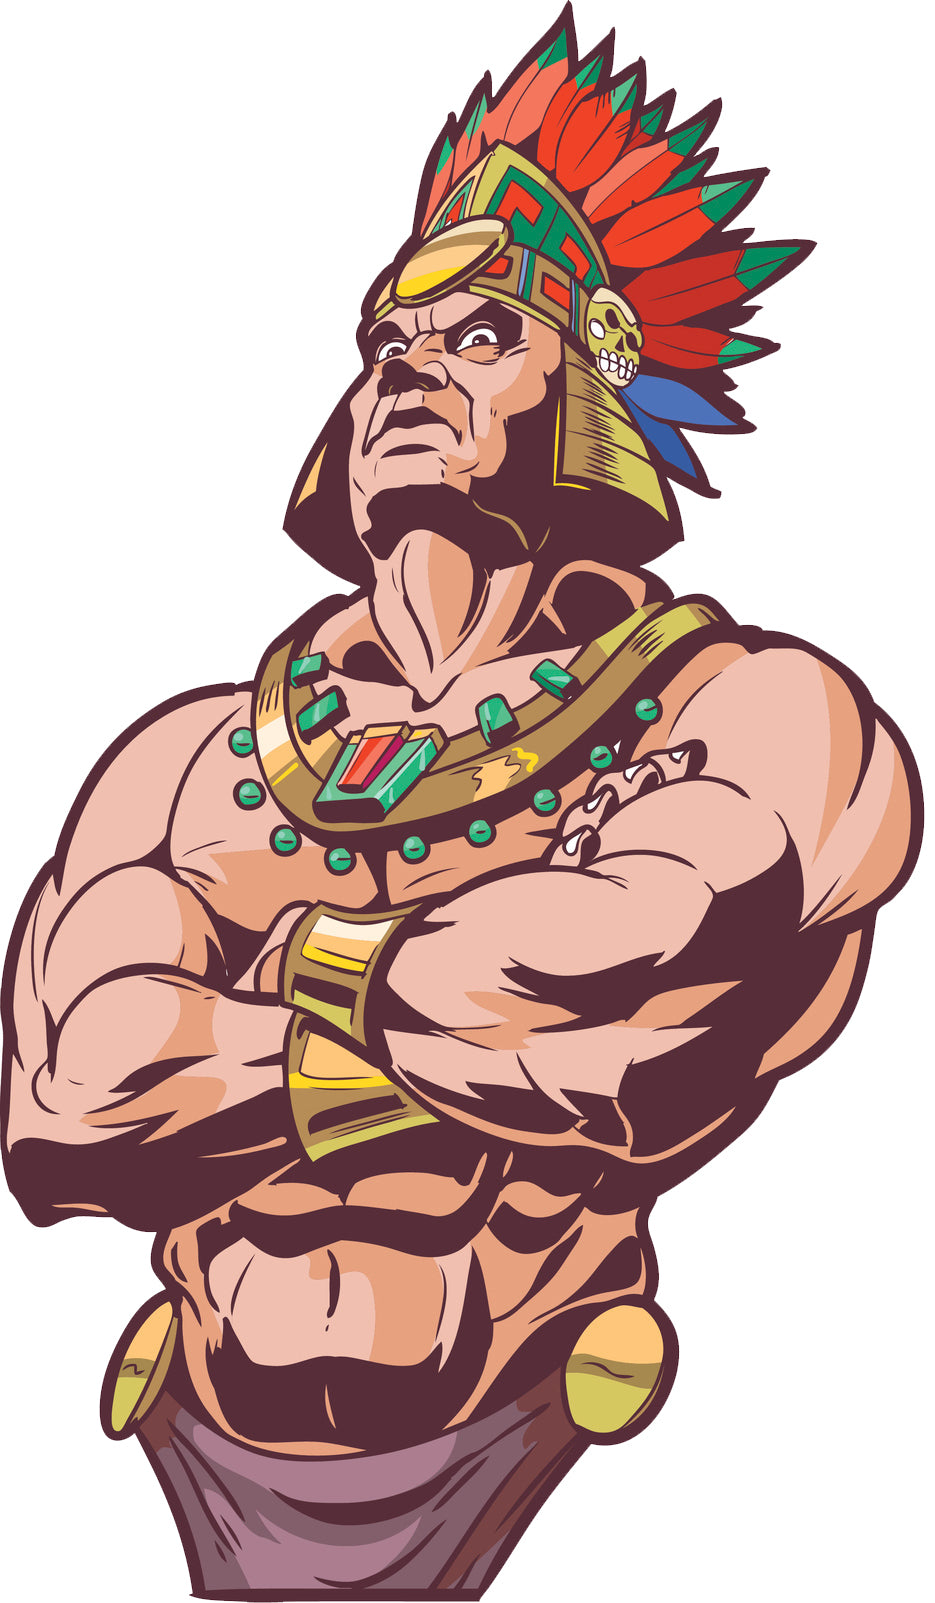 Powerful Buff Native American Indian Chief Cartoon - Colored Vinyl Decal Sticker